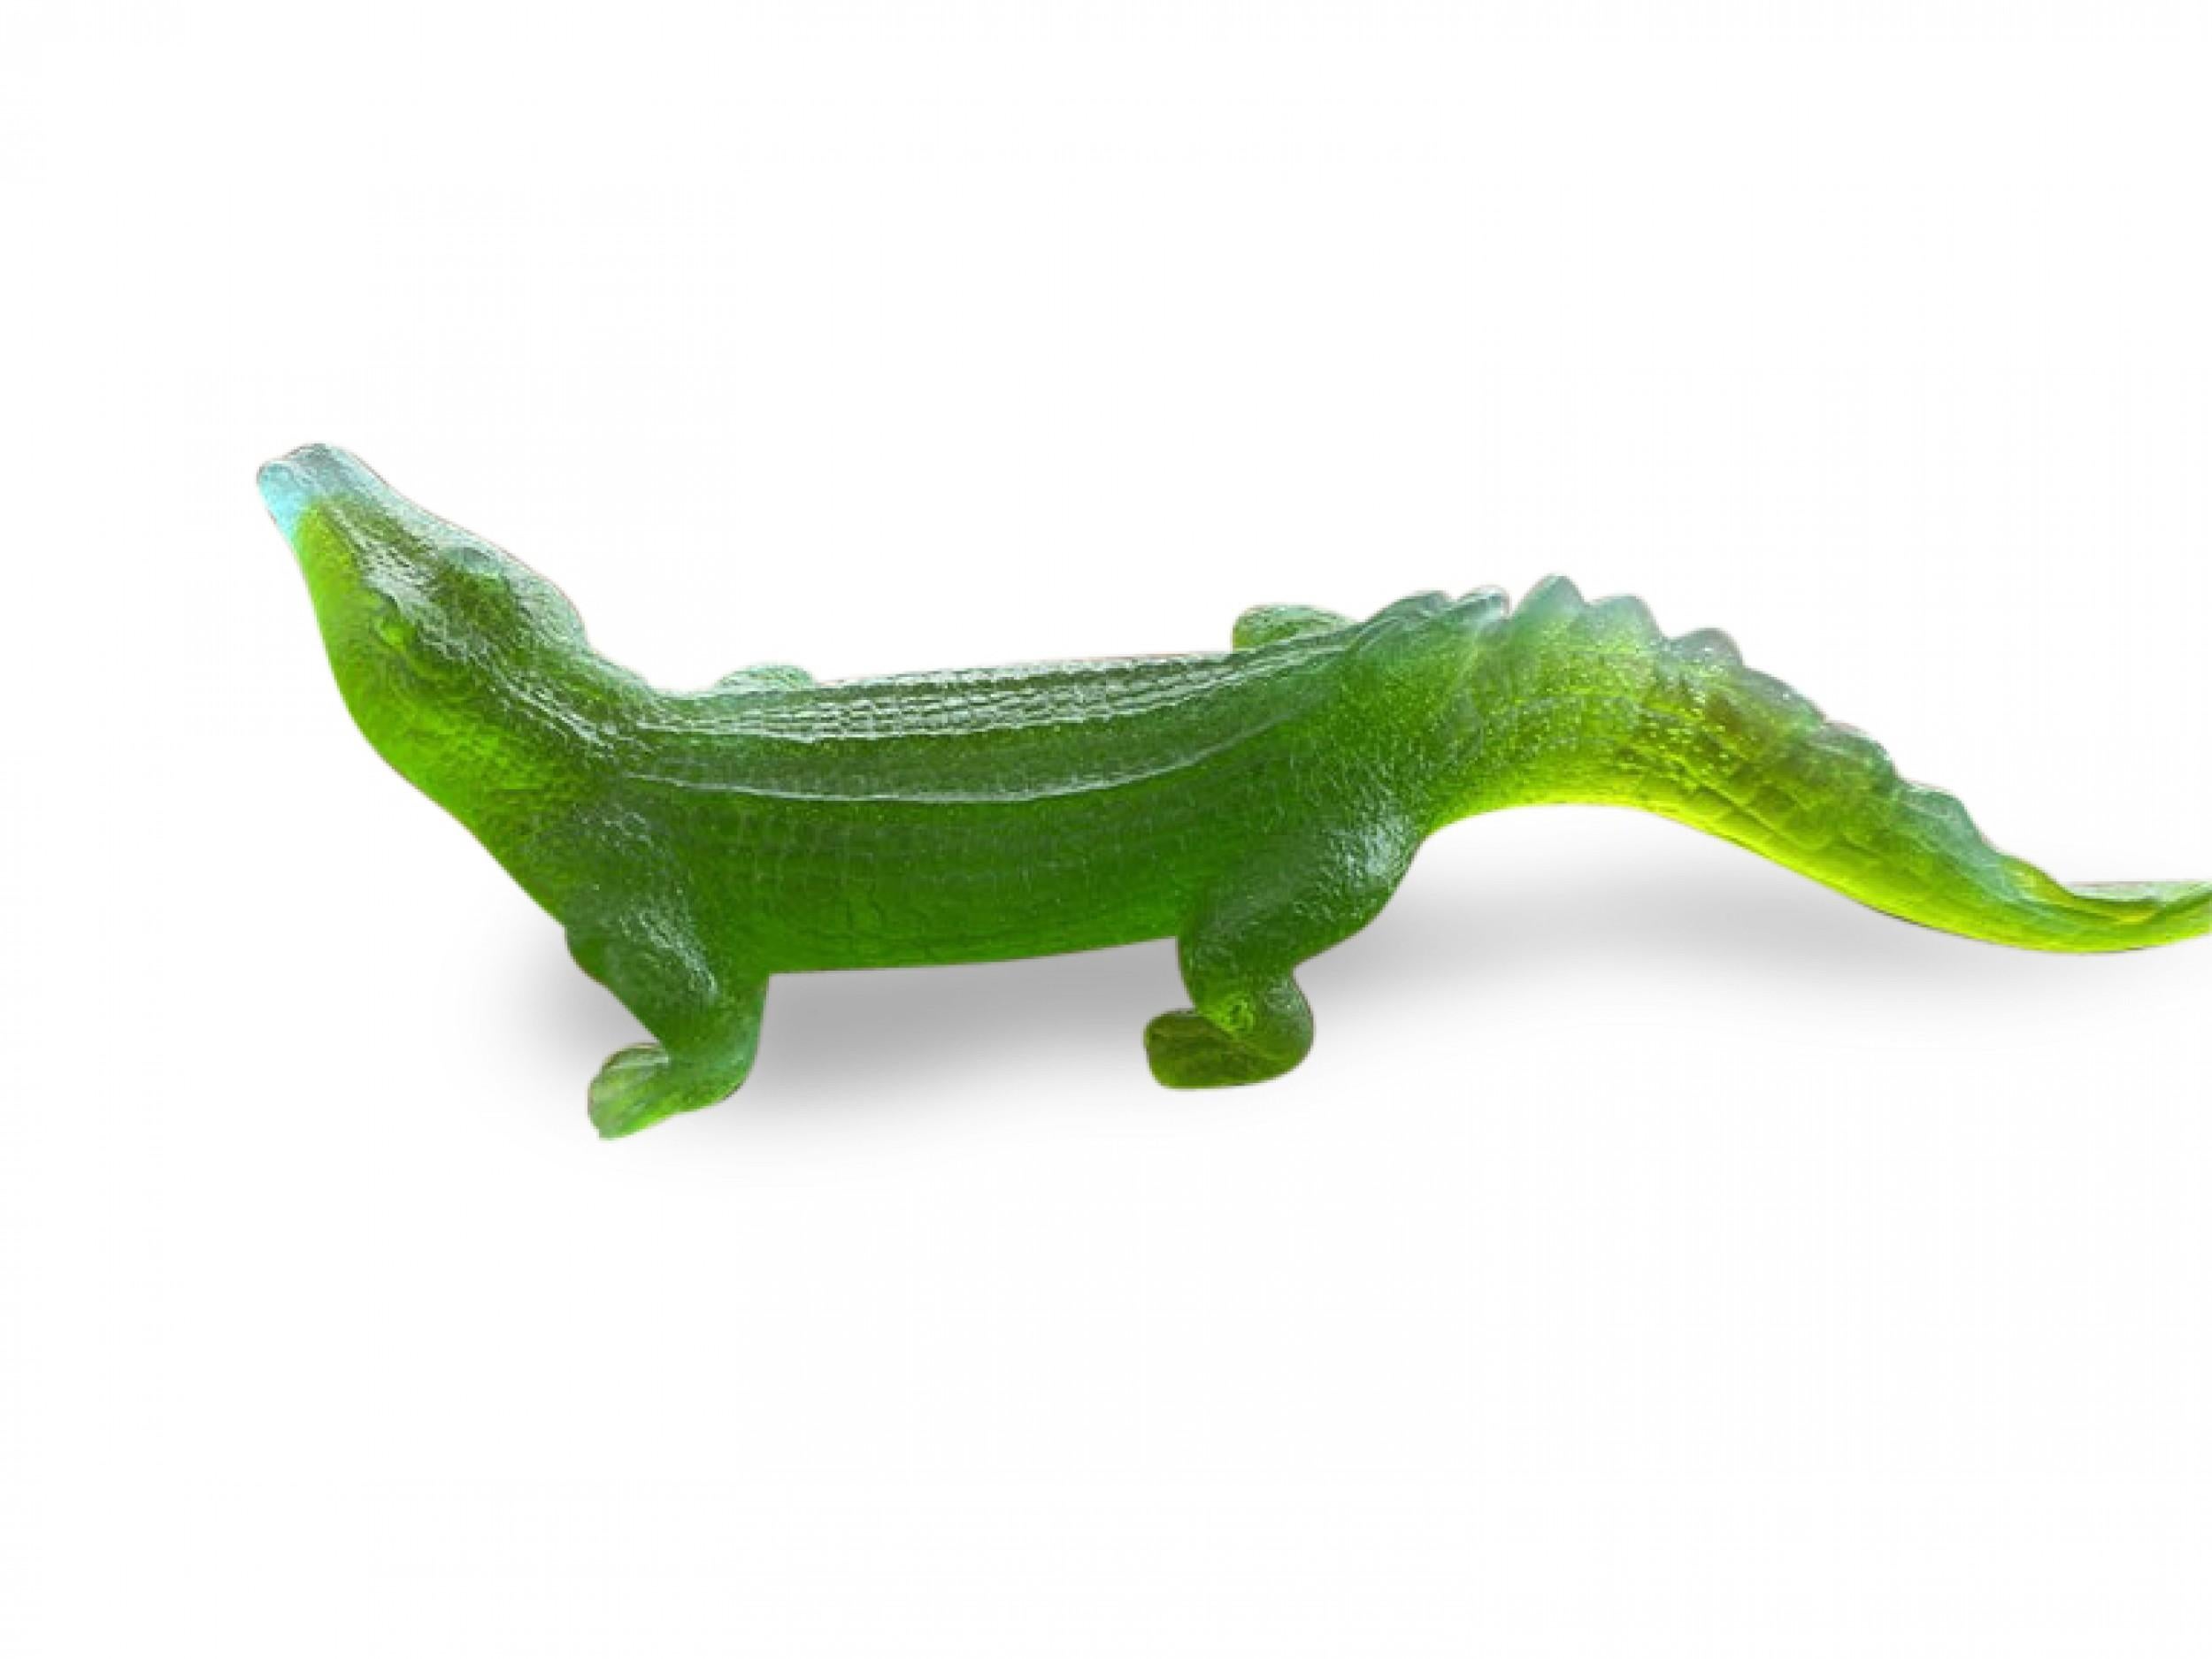 French Art Deco Pate-De-Verre Alligator Sculpture, Daum France In Good Condition For Sale In New York, NY